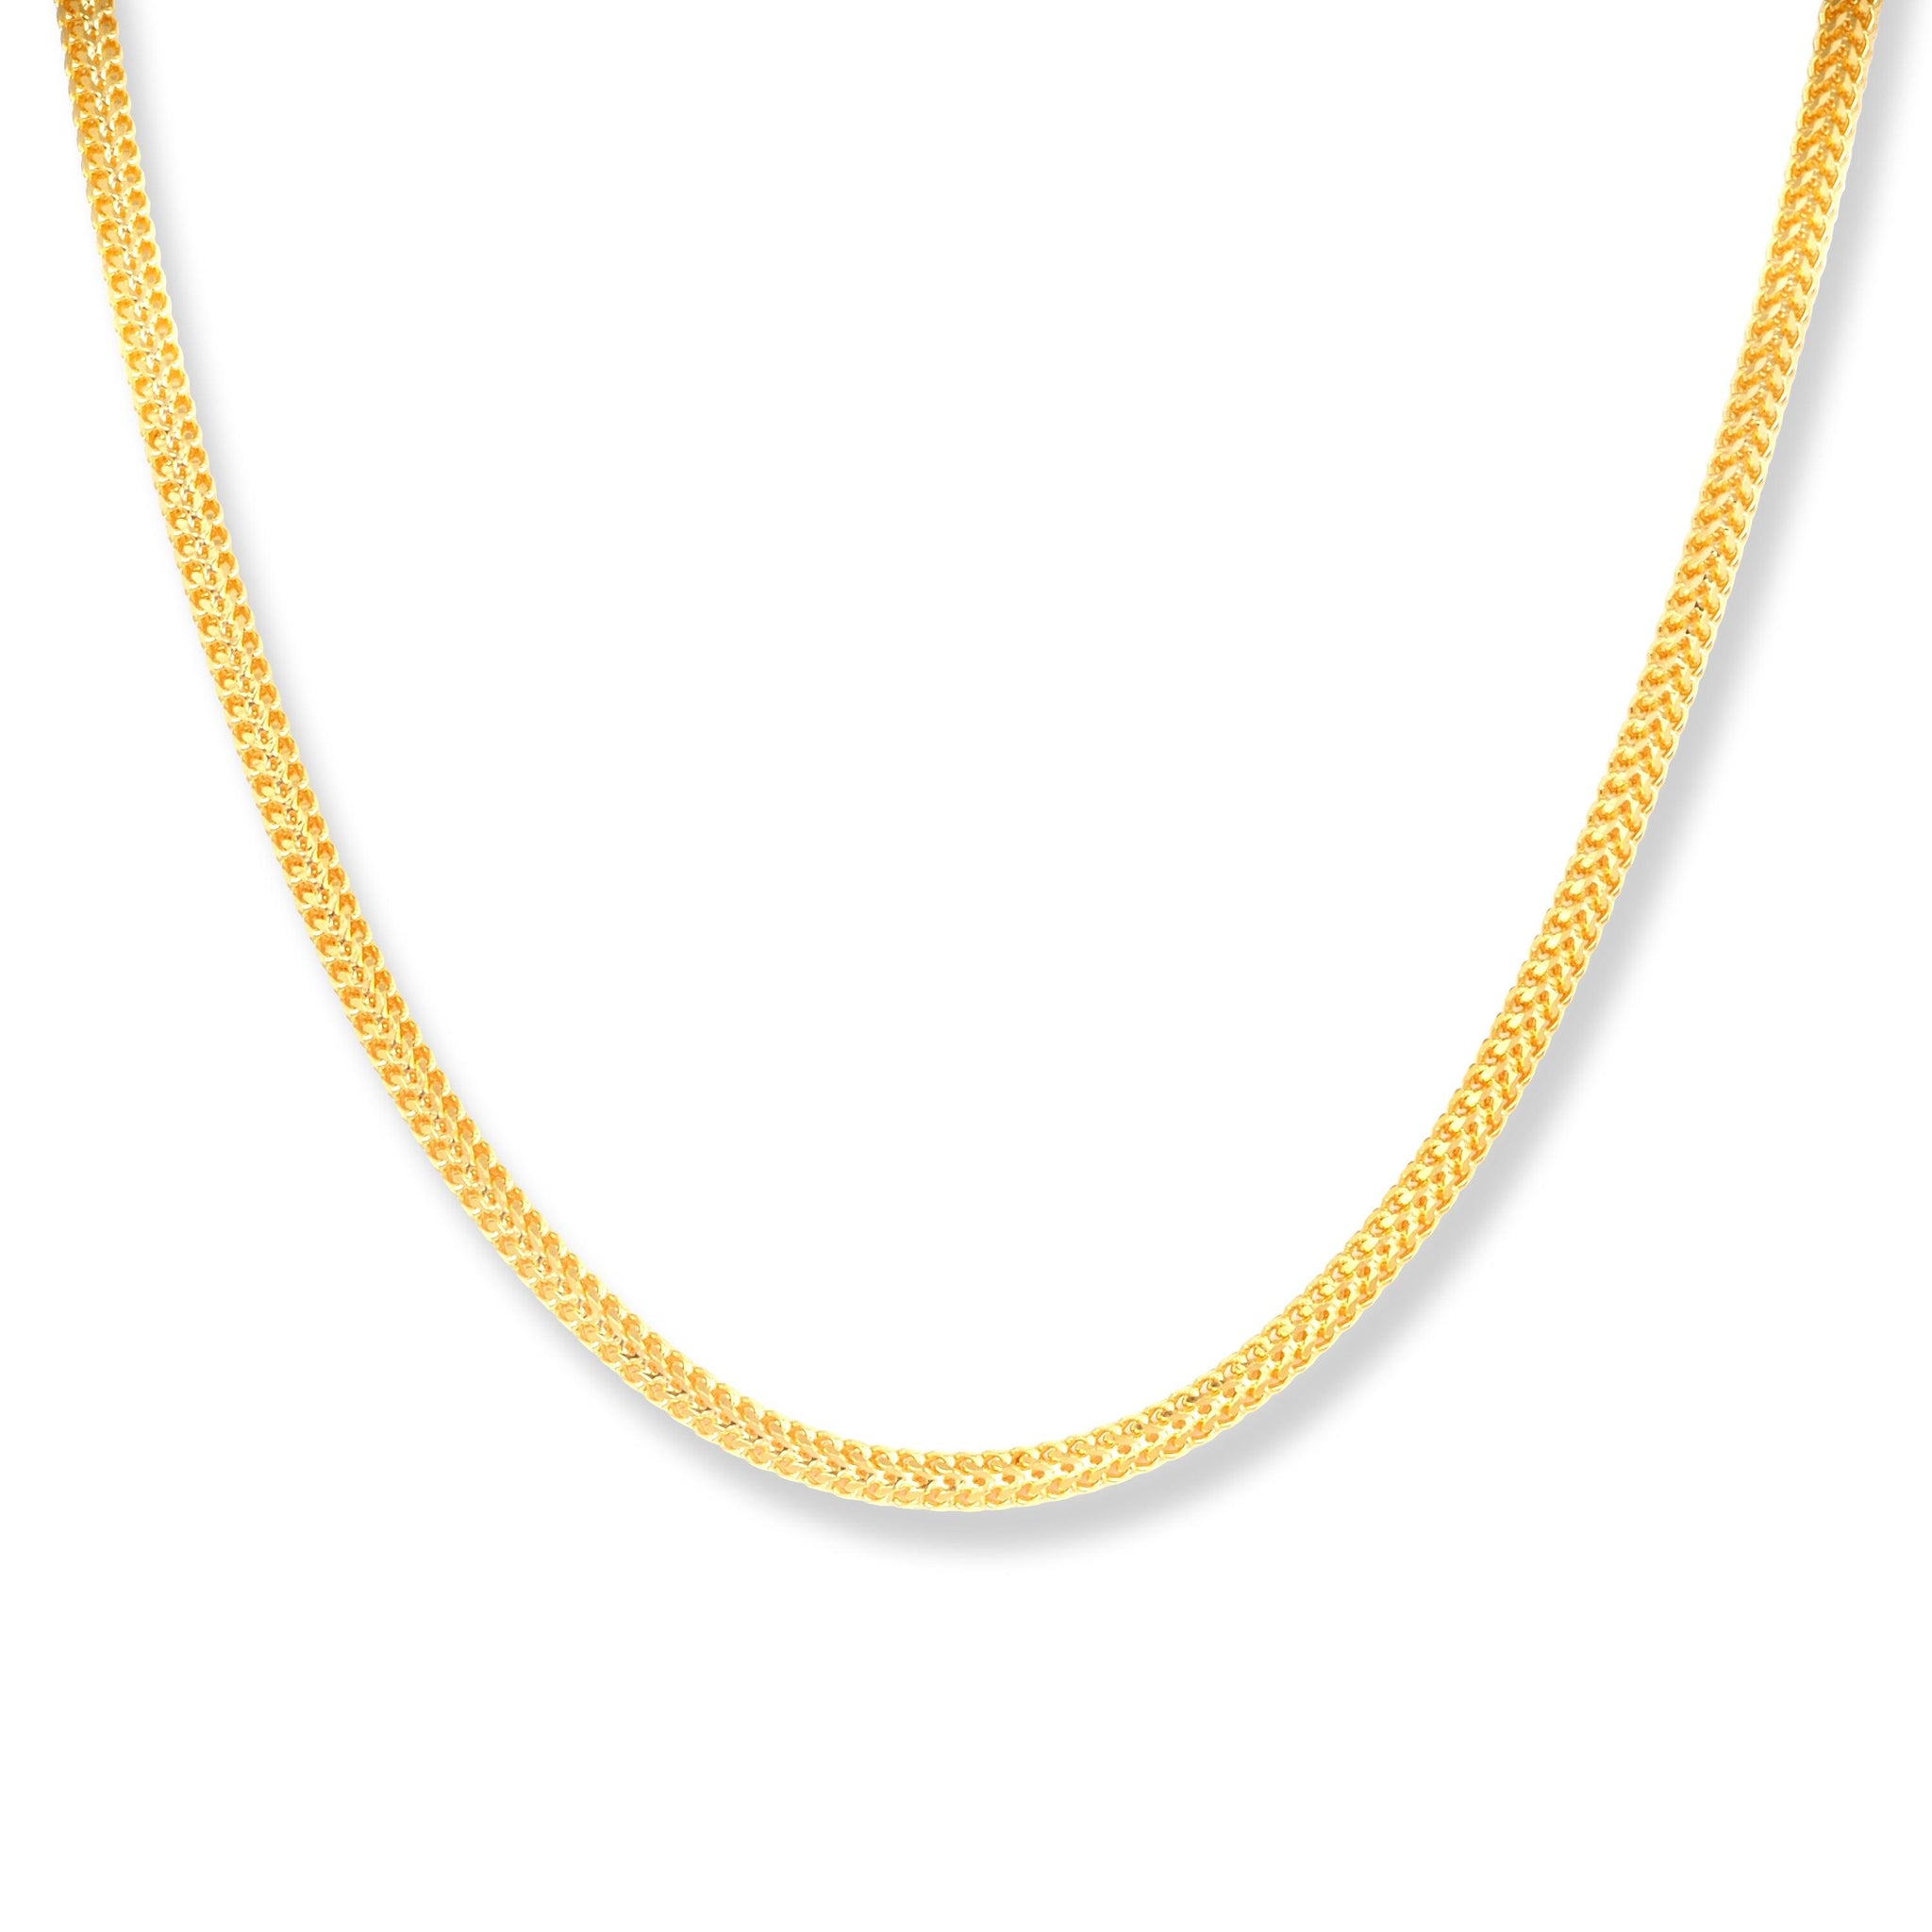 22ct Gold Round Foxtail Chain with Lobster Clasp C-7138